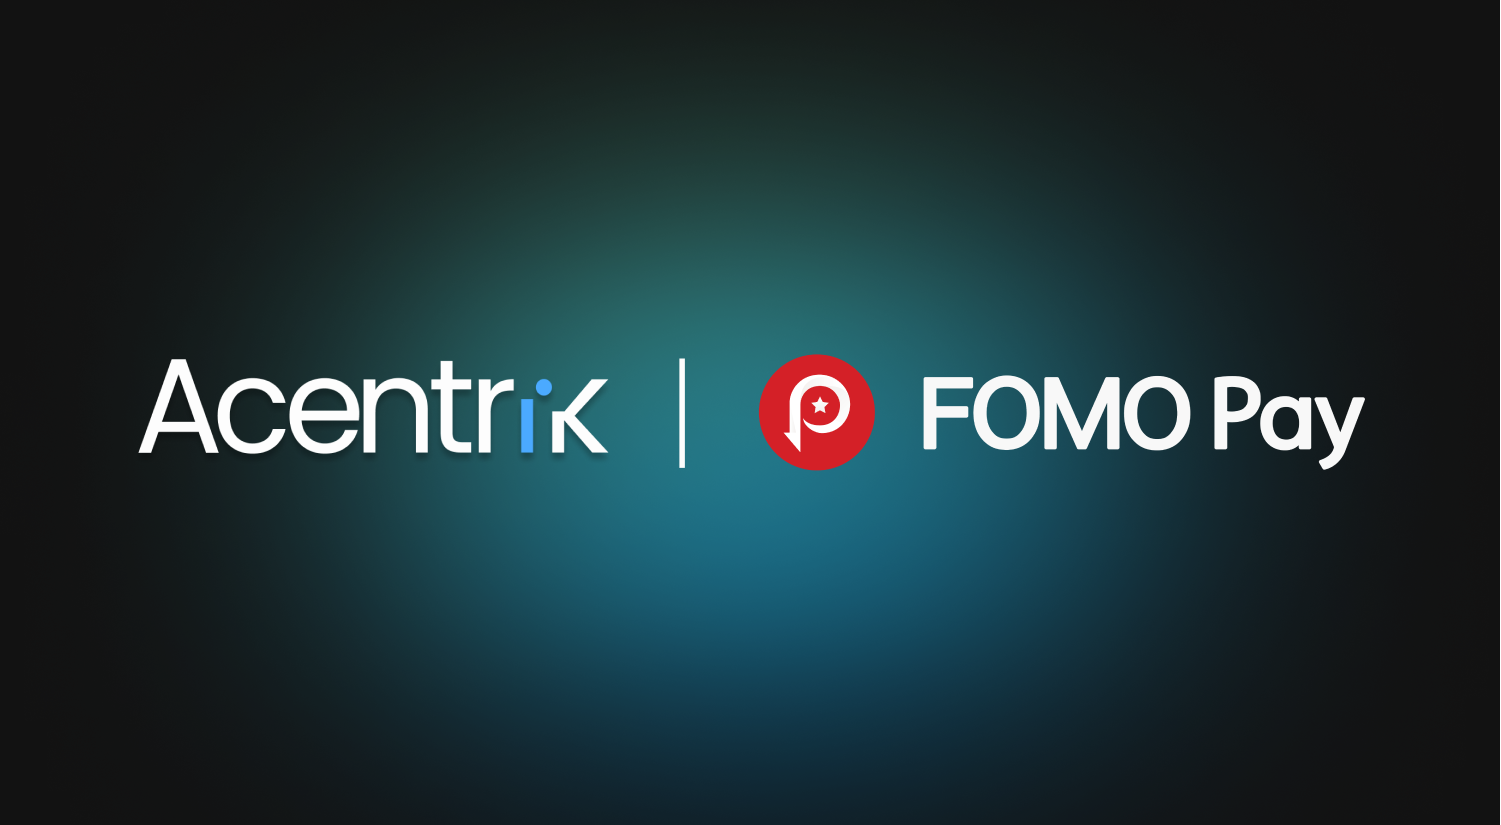 Acentrik partners with FOMO Pay for incentivizing global data exchanges.